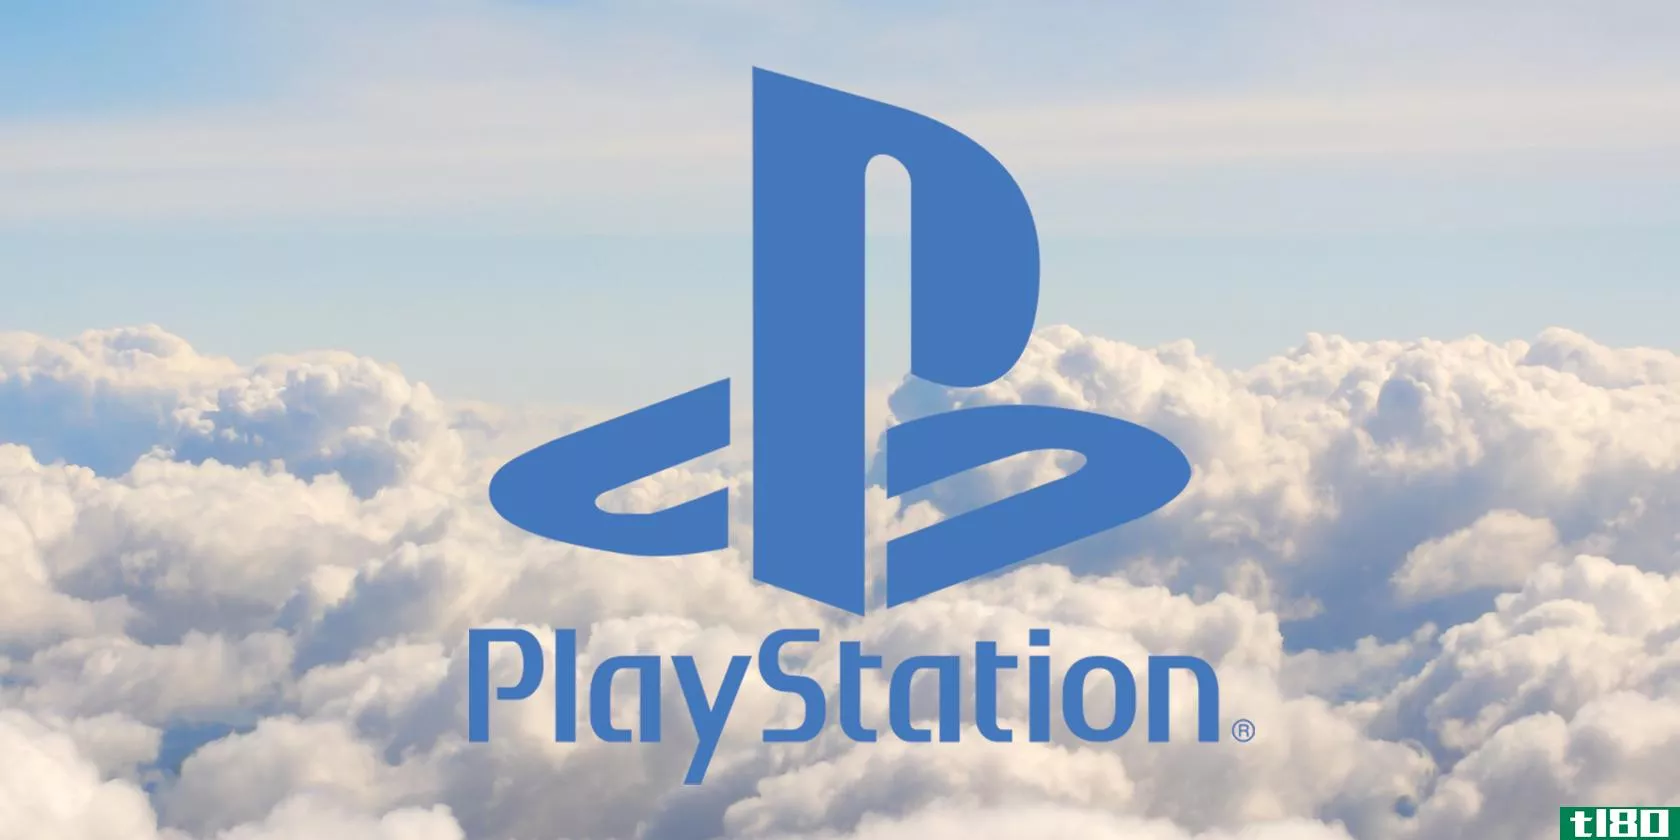 playstation logo with clouds